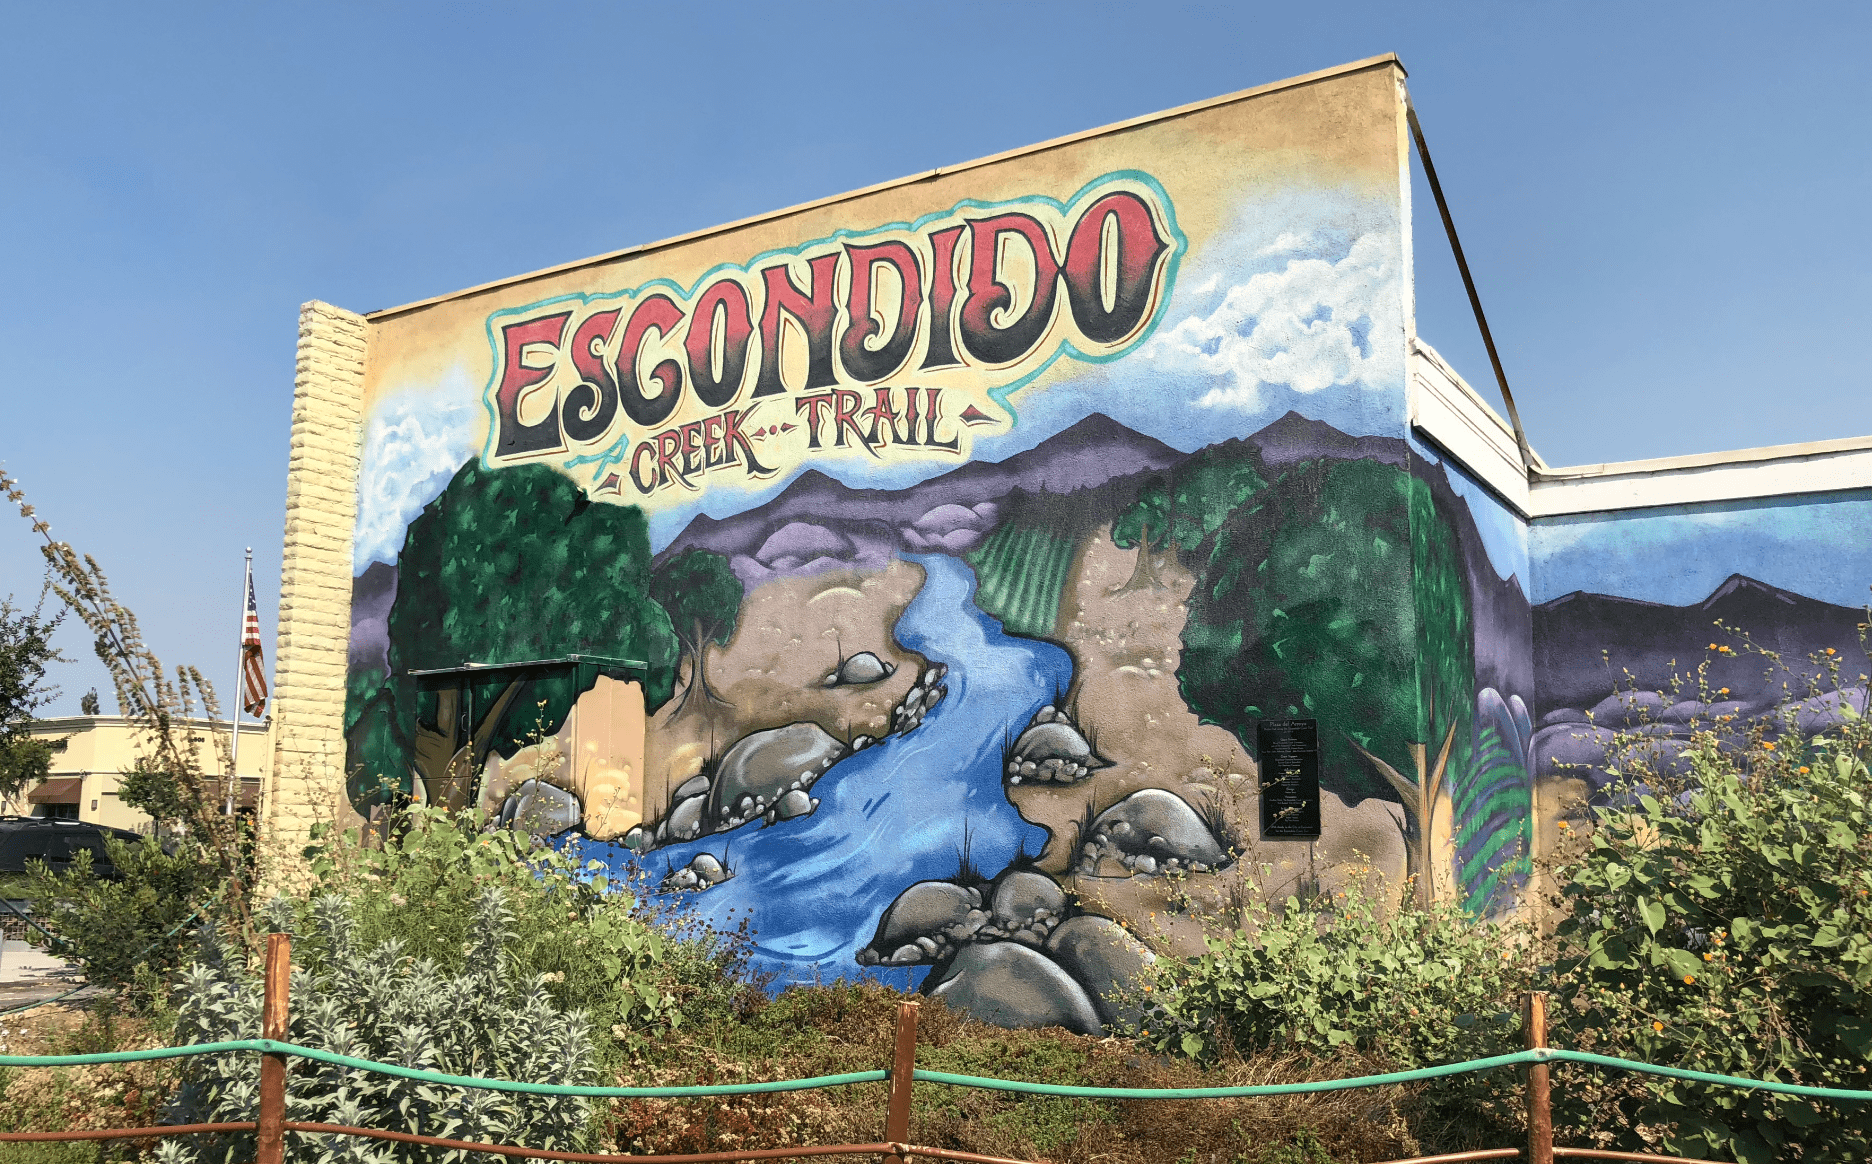 A large mural of a river, surrounded by trees and boulders leads up from the bottom of a concrete wall, disappearing into a mountain range.